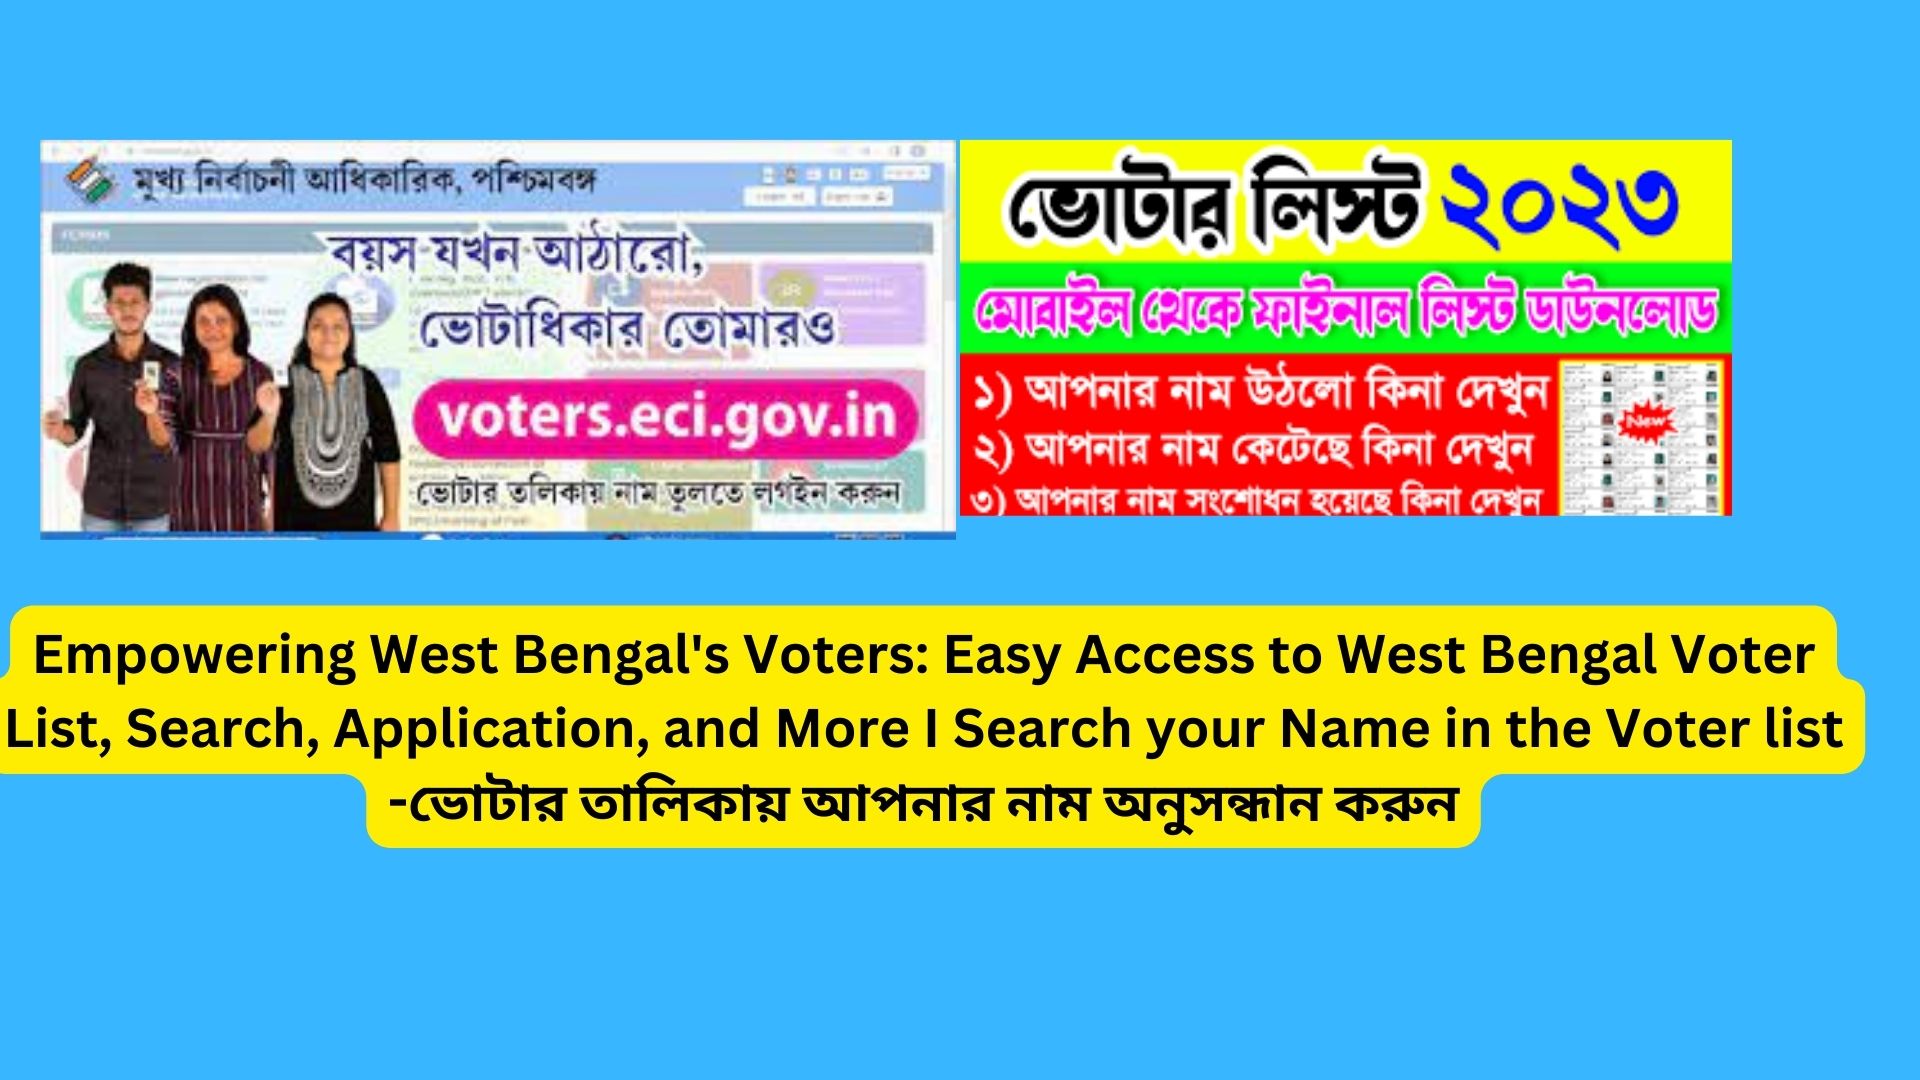 Empowering West Bengal's Voters: Easy Access to West Bengal Voter List, Search, Application, and More I Search your Name in the Voter list -ভোটার তালিকায় আপনার নাম অনুসন্ধান করুন